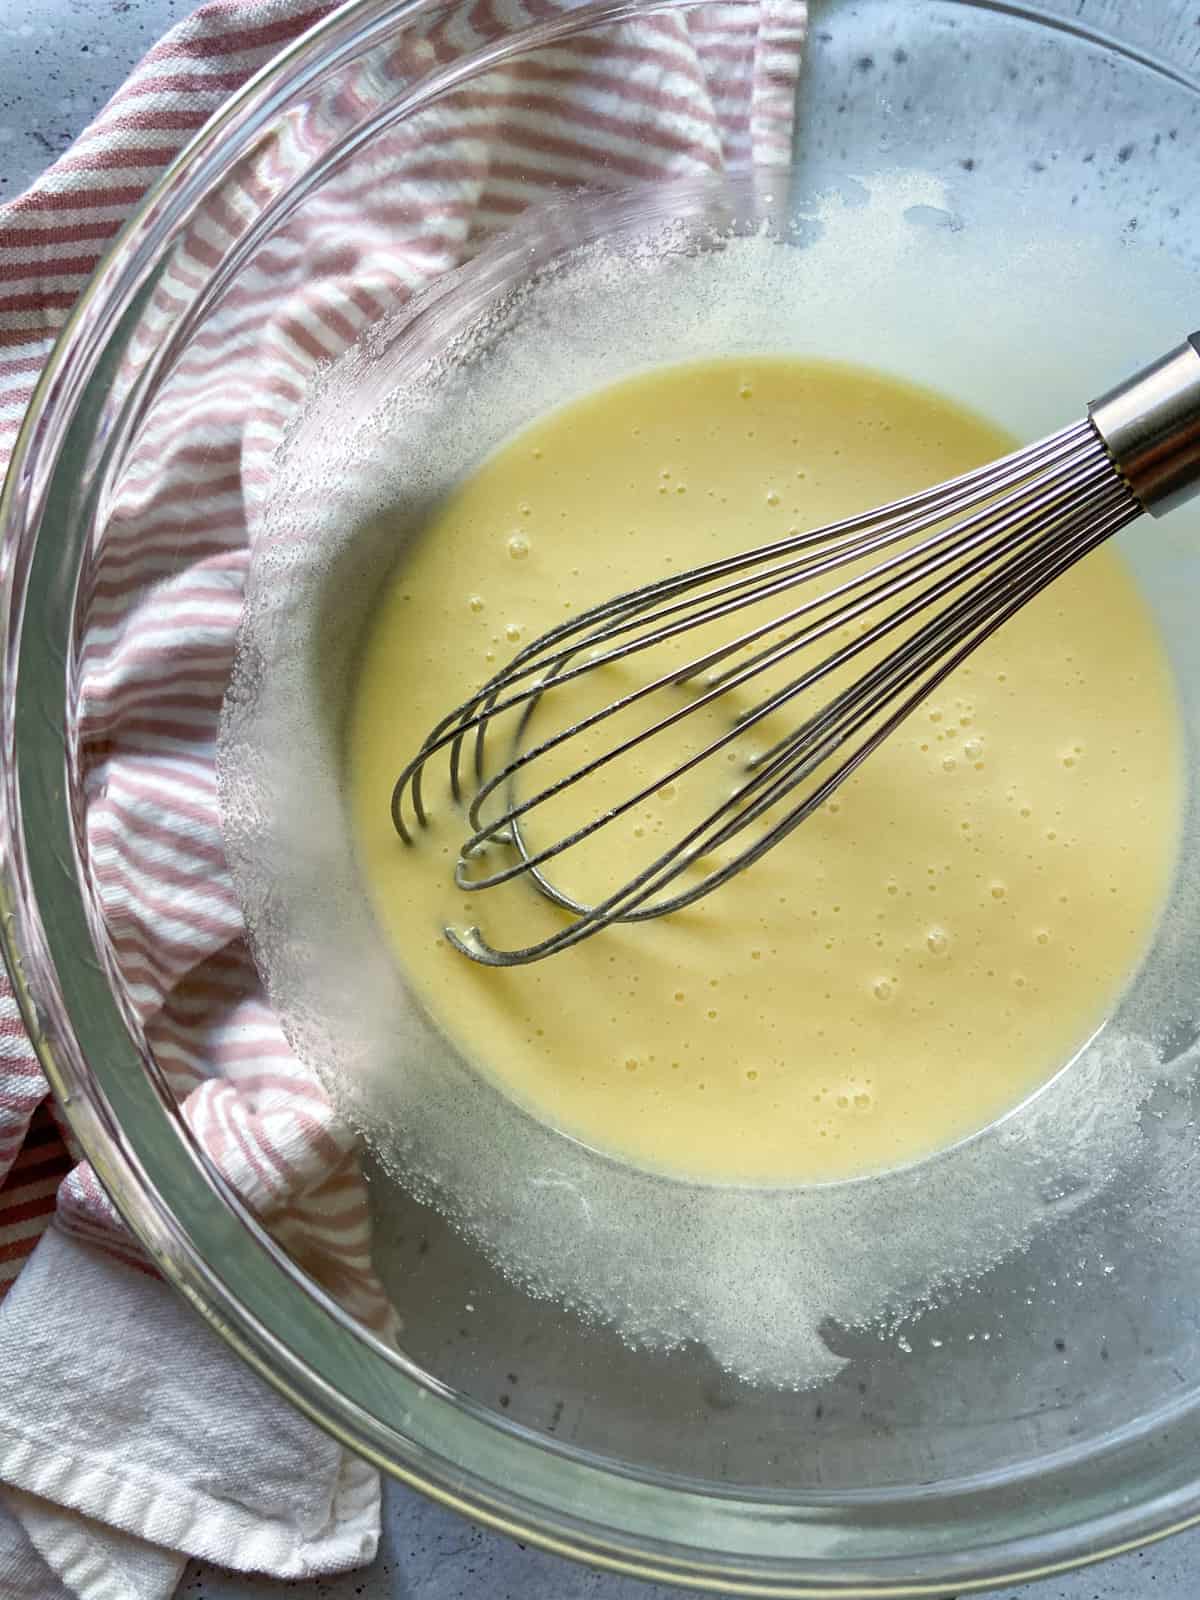 The completed egg-butter mixture in a bowl with a whisk.